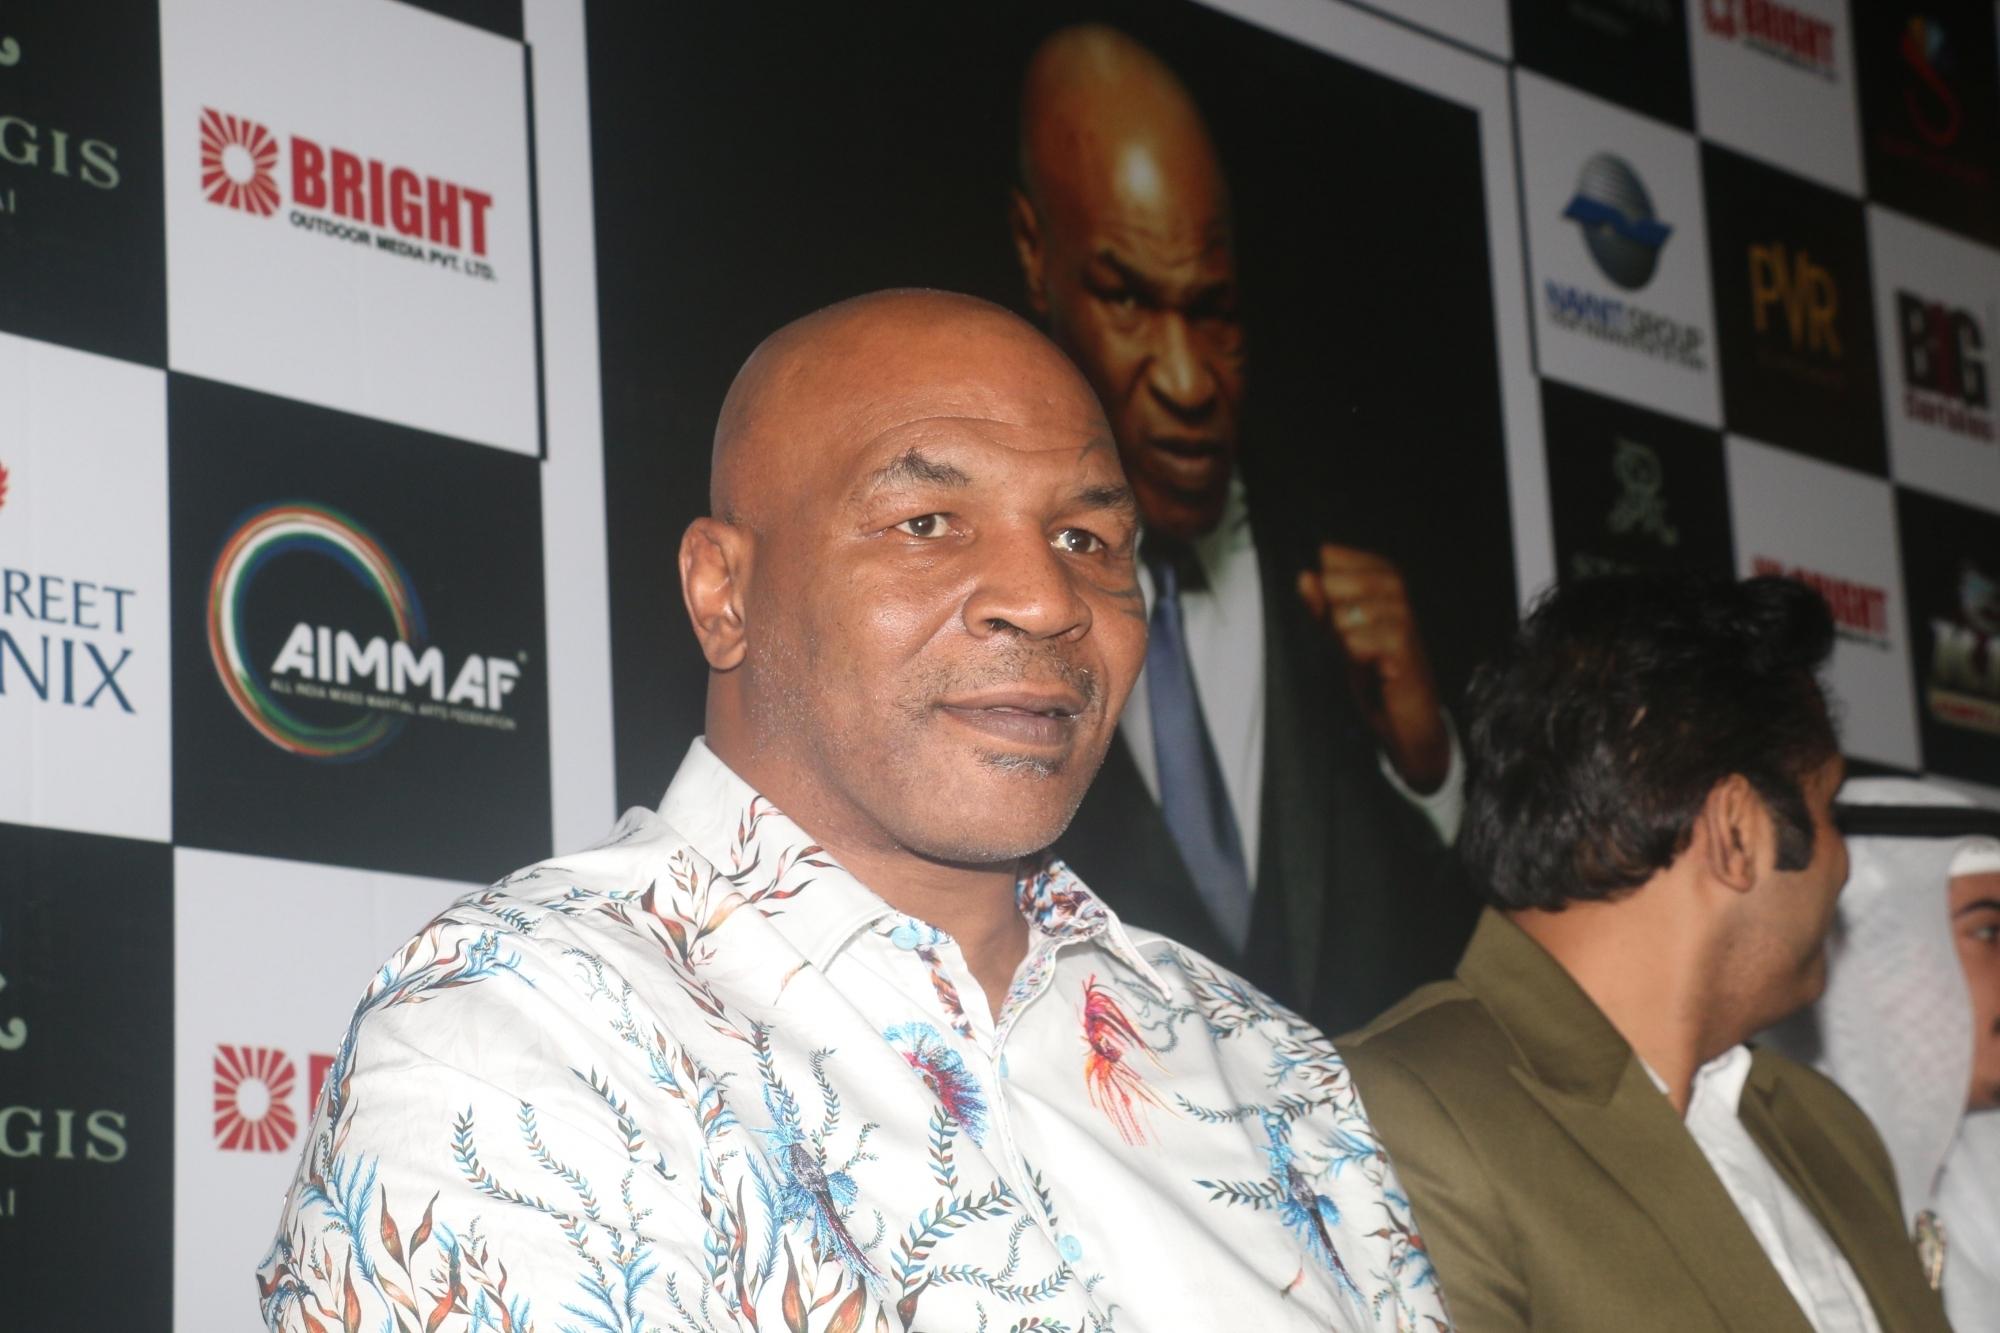 Mumbai: Former American boxer Mike Tyson during a press conference on 'Kumite 1 League', in Mumbai on Sept 28, 2018. (Photo: IANS) by .